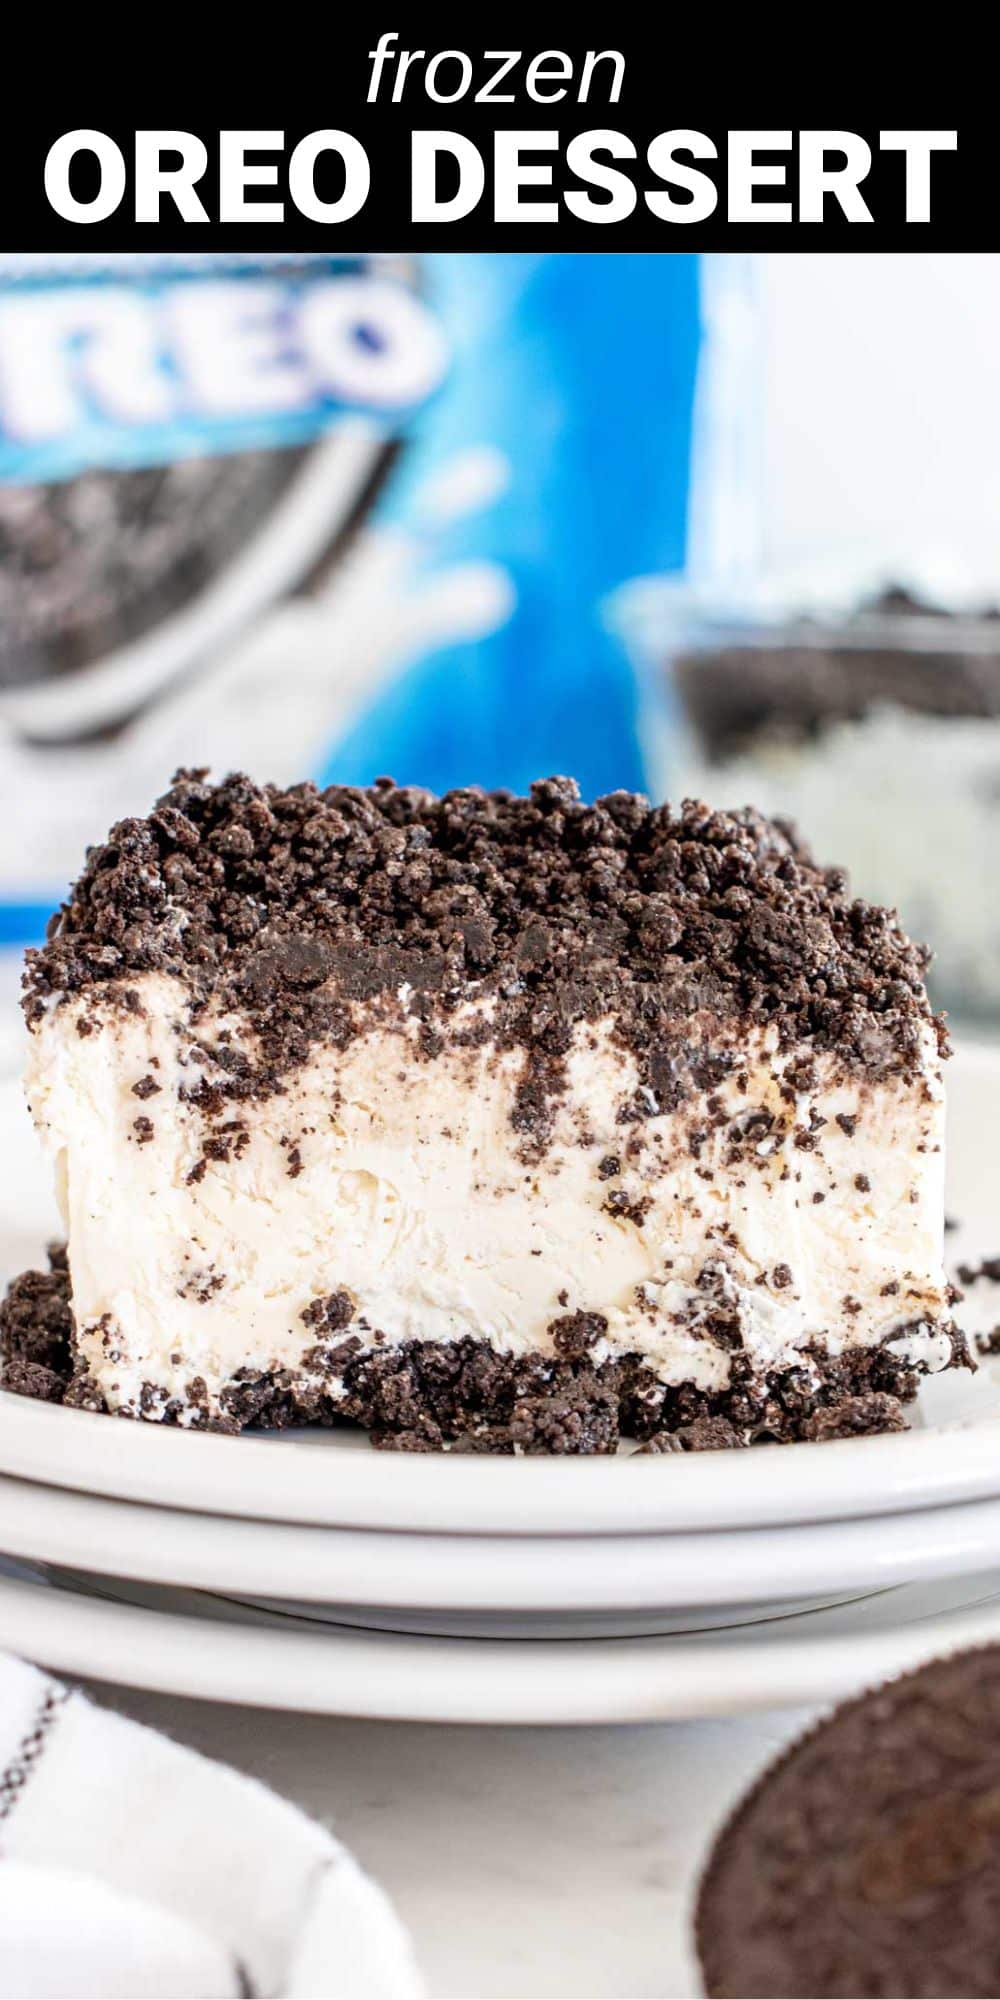 This no-bake Frozen Oreo Dessert is an easy-to-make treat that combines a velvety cream cheese filling with America's favorite cookie. Most frozen Oreo desserts have a regular vanilla ice cream center, but ours features a unique, light, and fluffy cream cheese center. It’s like three desserts in one: ice cream, cheesecake, and Oreos. 